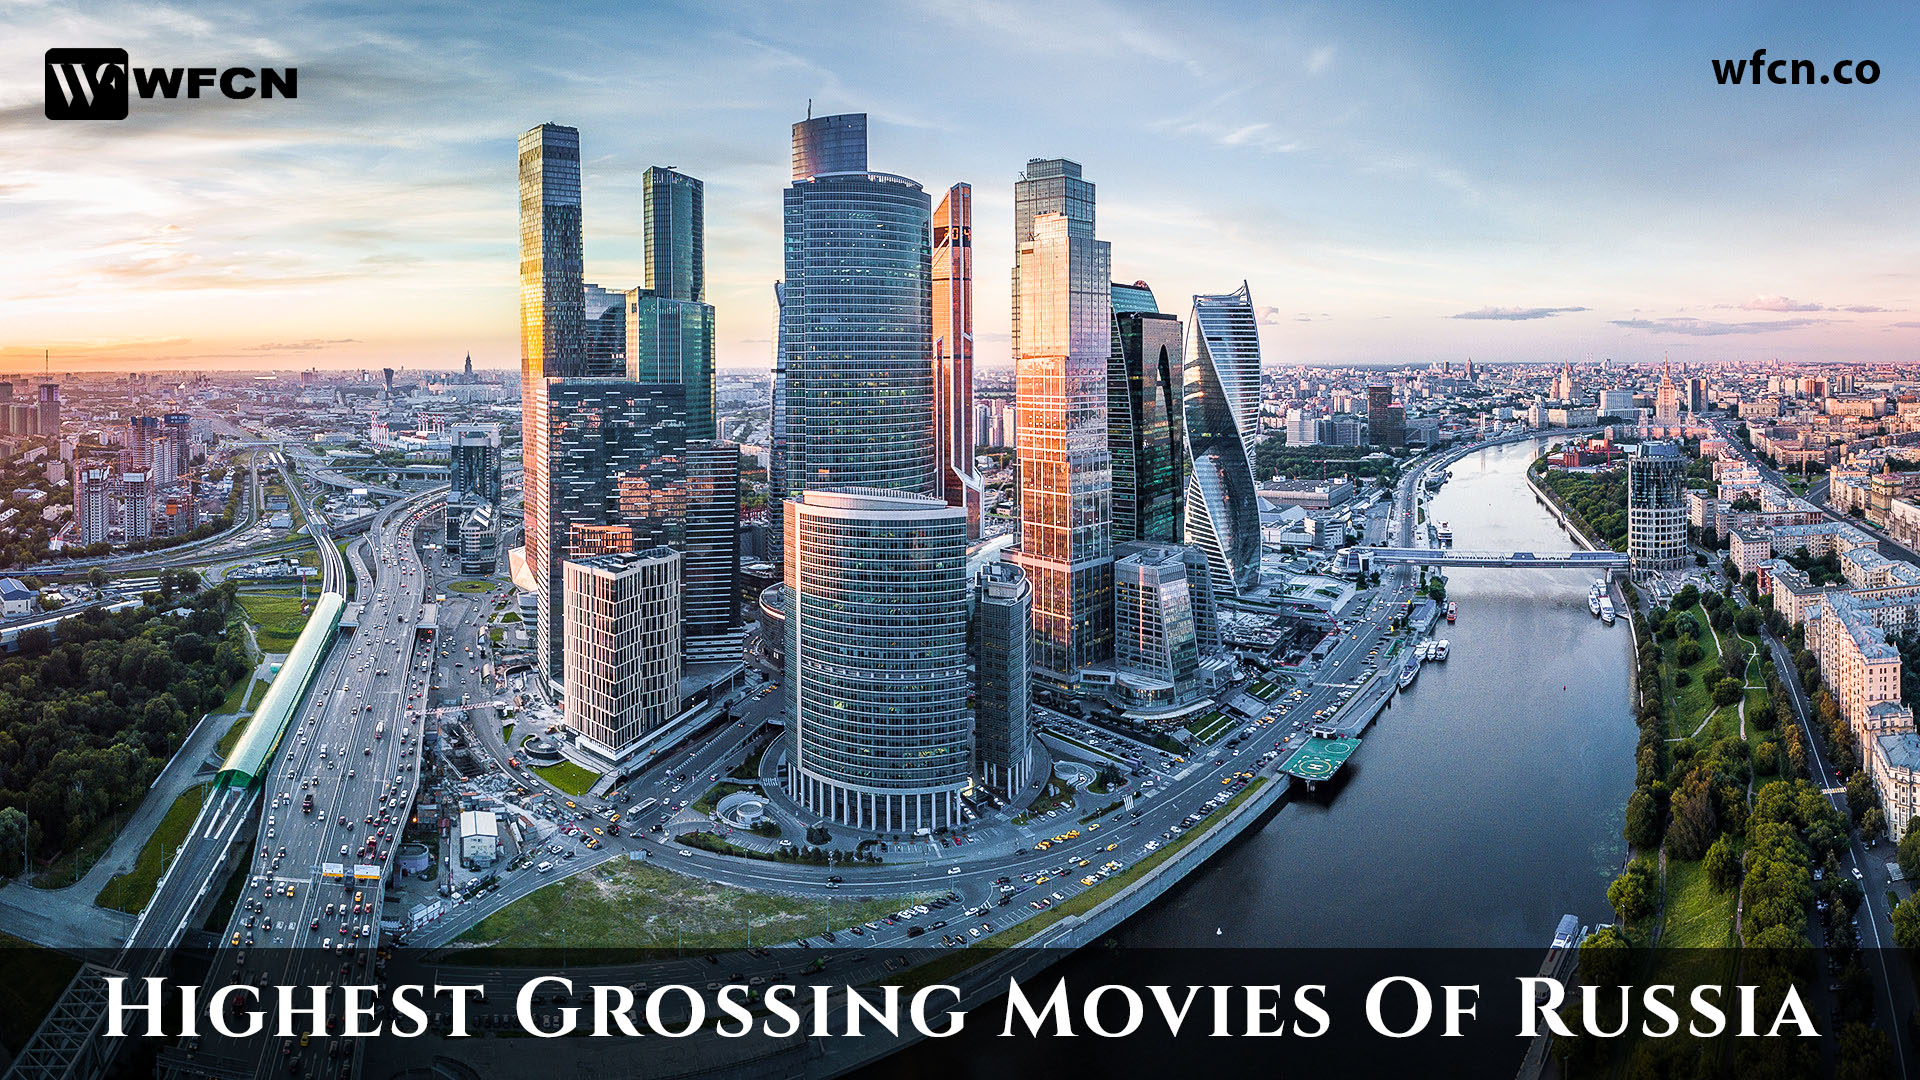 Most Popular Films of Russia